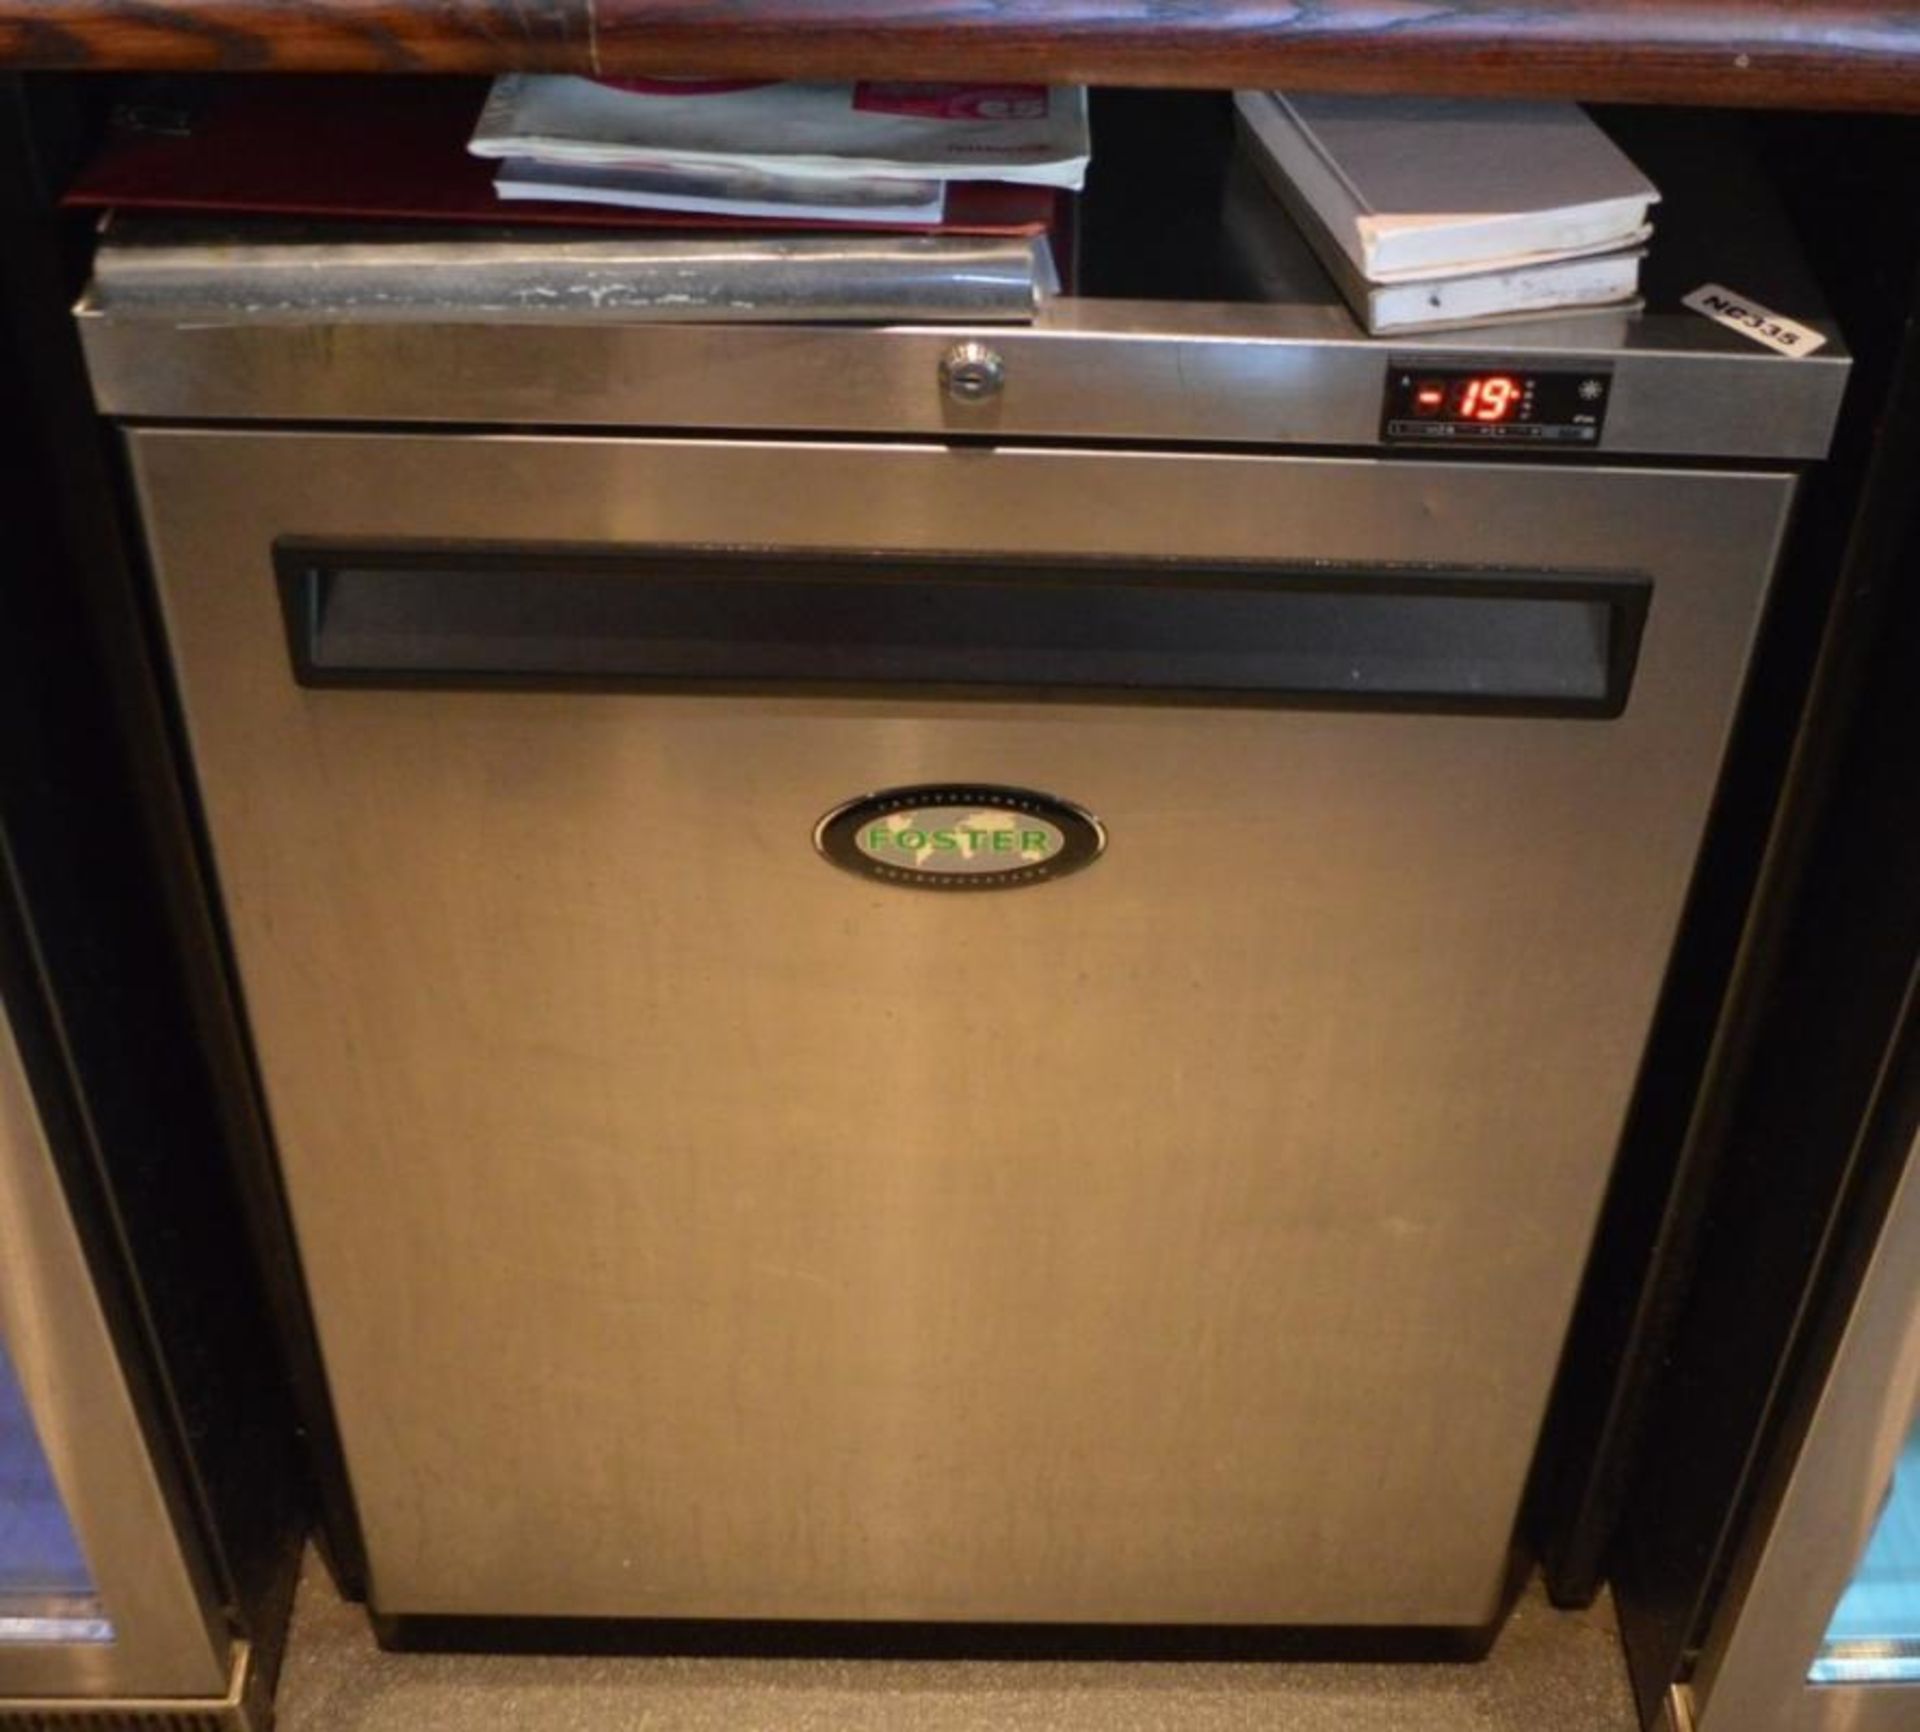 1 x Foster Undercounter Single Door Refrigerator With Stainless Steel Finish - Model HR150-A - H80 x